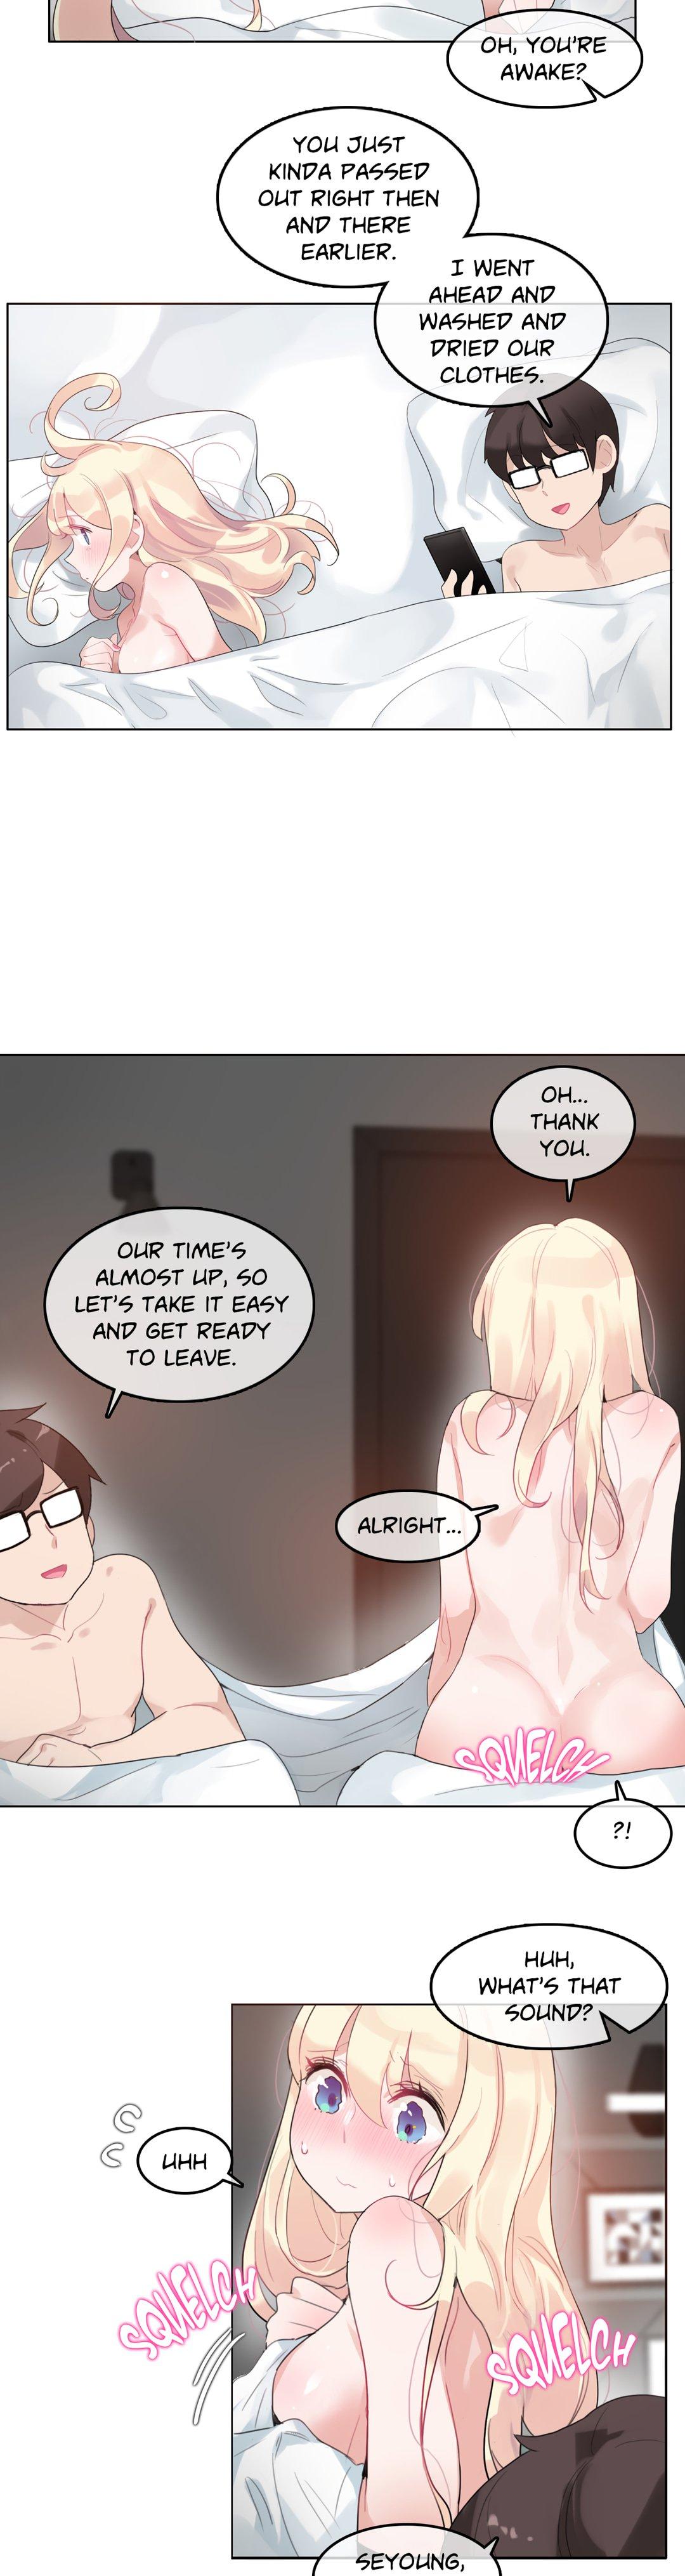 A Pervert's Daily Life • Chapter 41-45 76